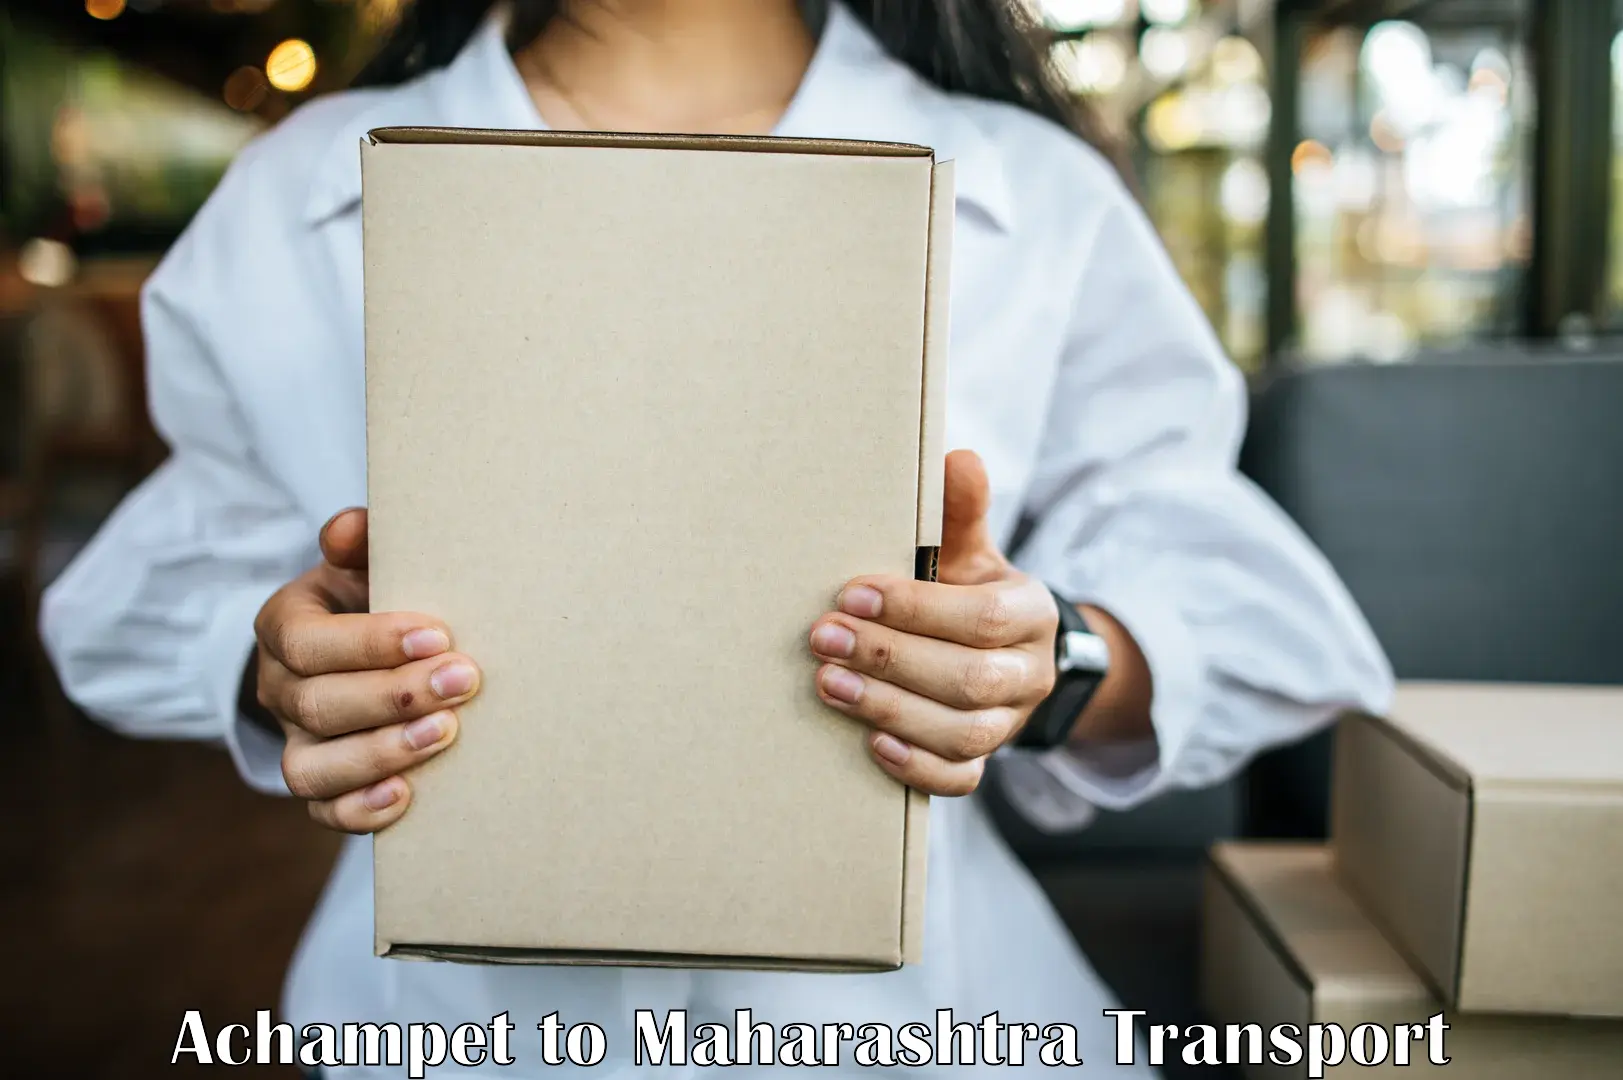 Truck transport companies in India Achampet to Osmanabad